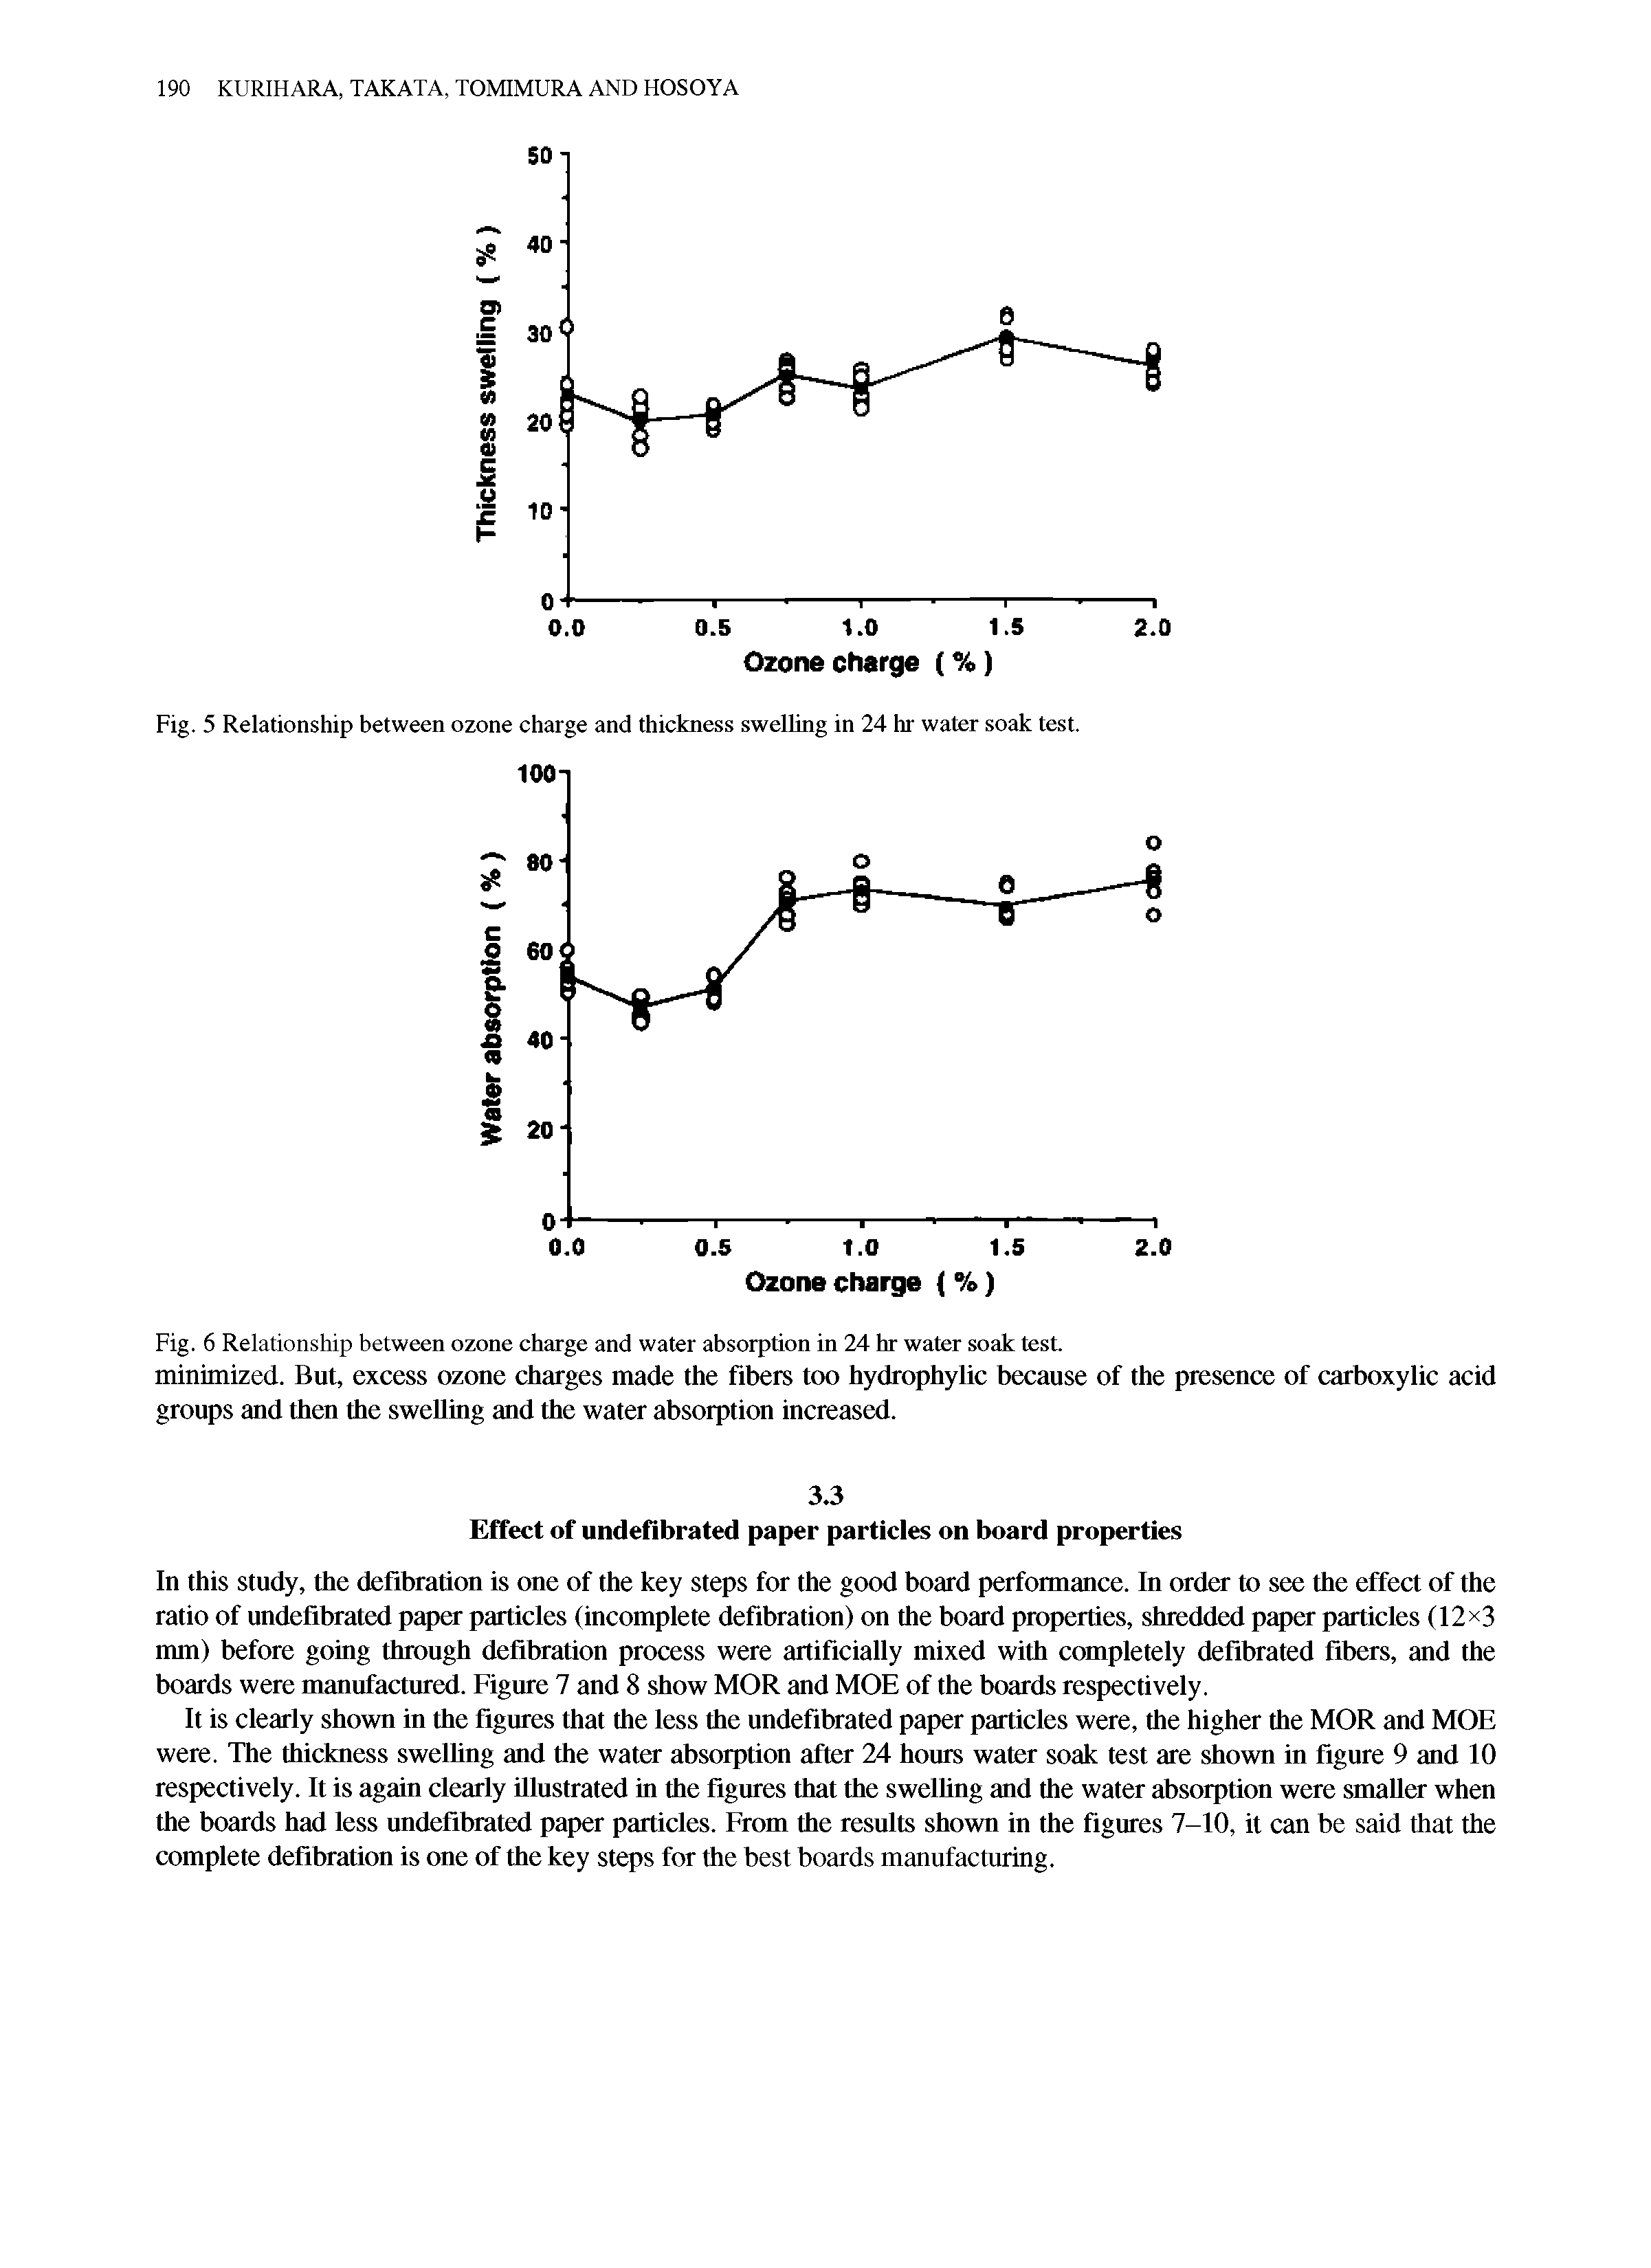 Fig. 6 Relationship between ozone charge and water absorption in 24 hr water soak test.